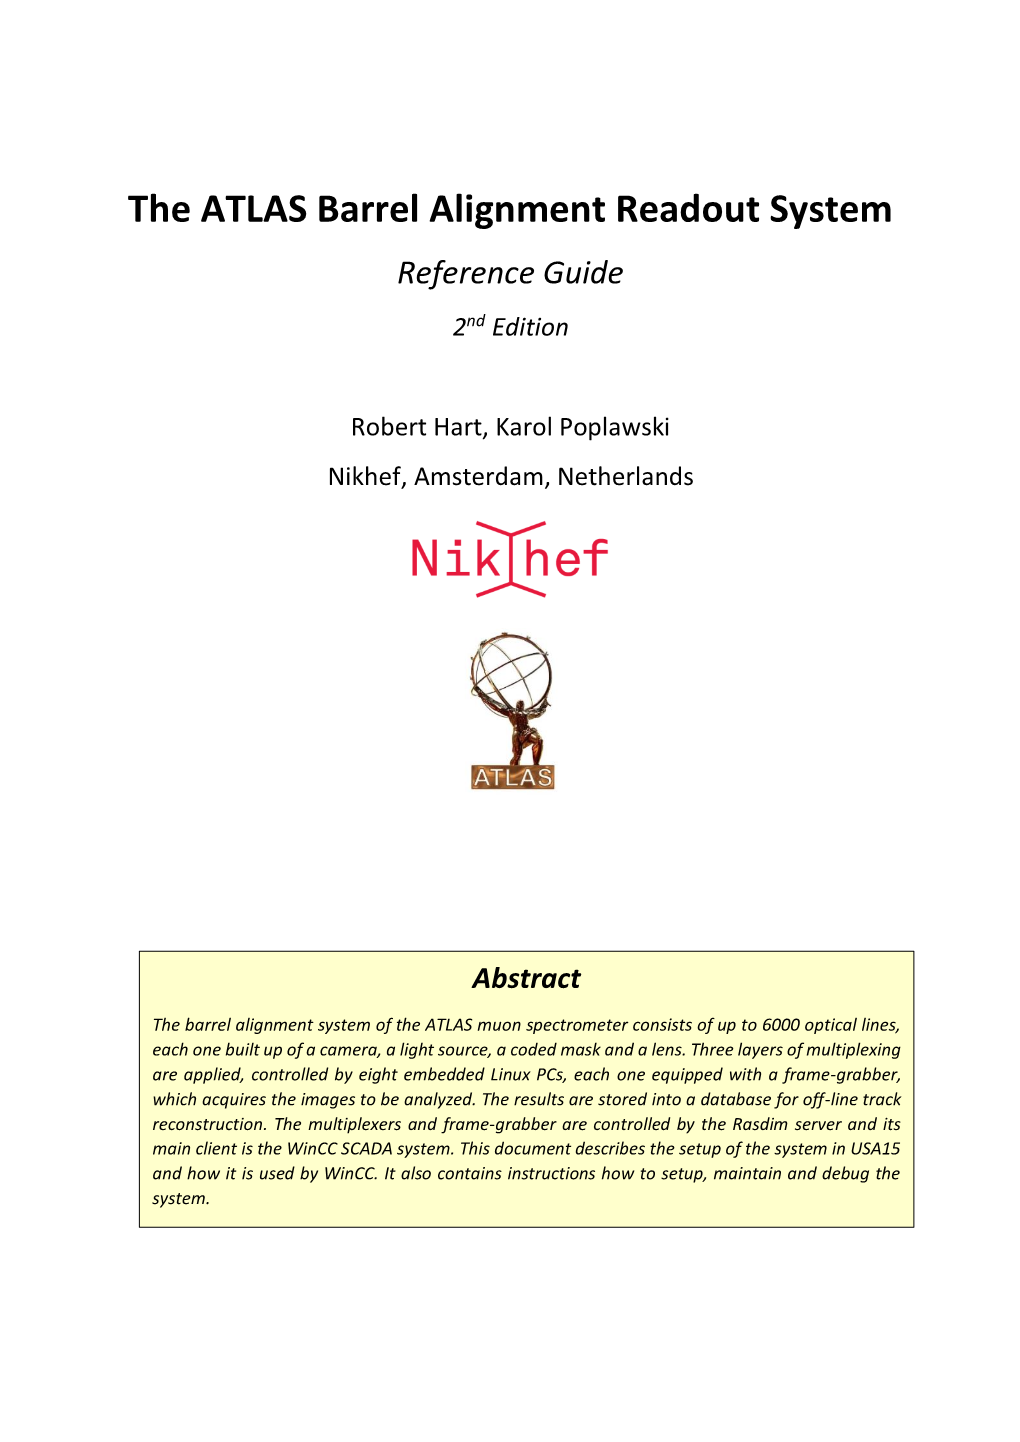 The ATLAS Barrel Alignment Readout System Reference Guide 2Nd Edition